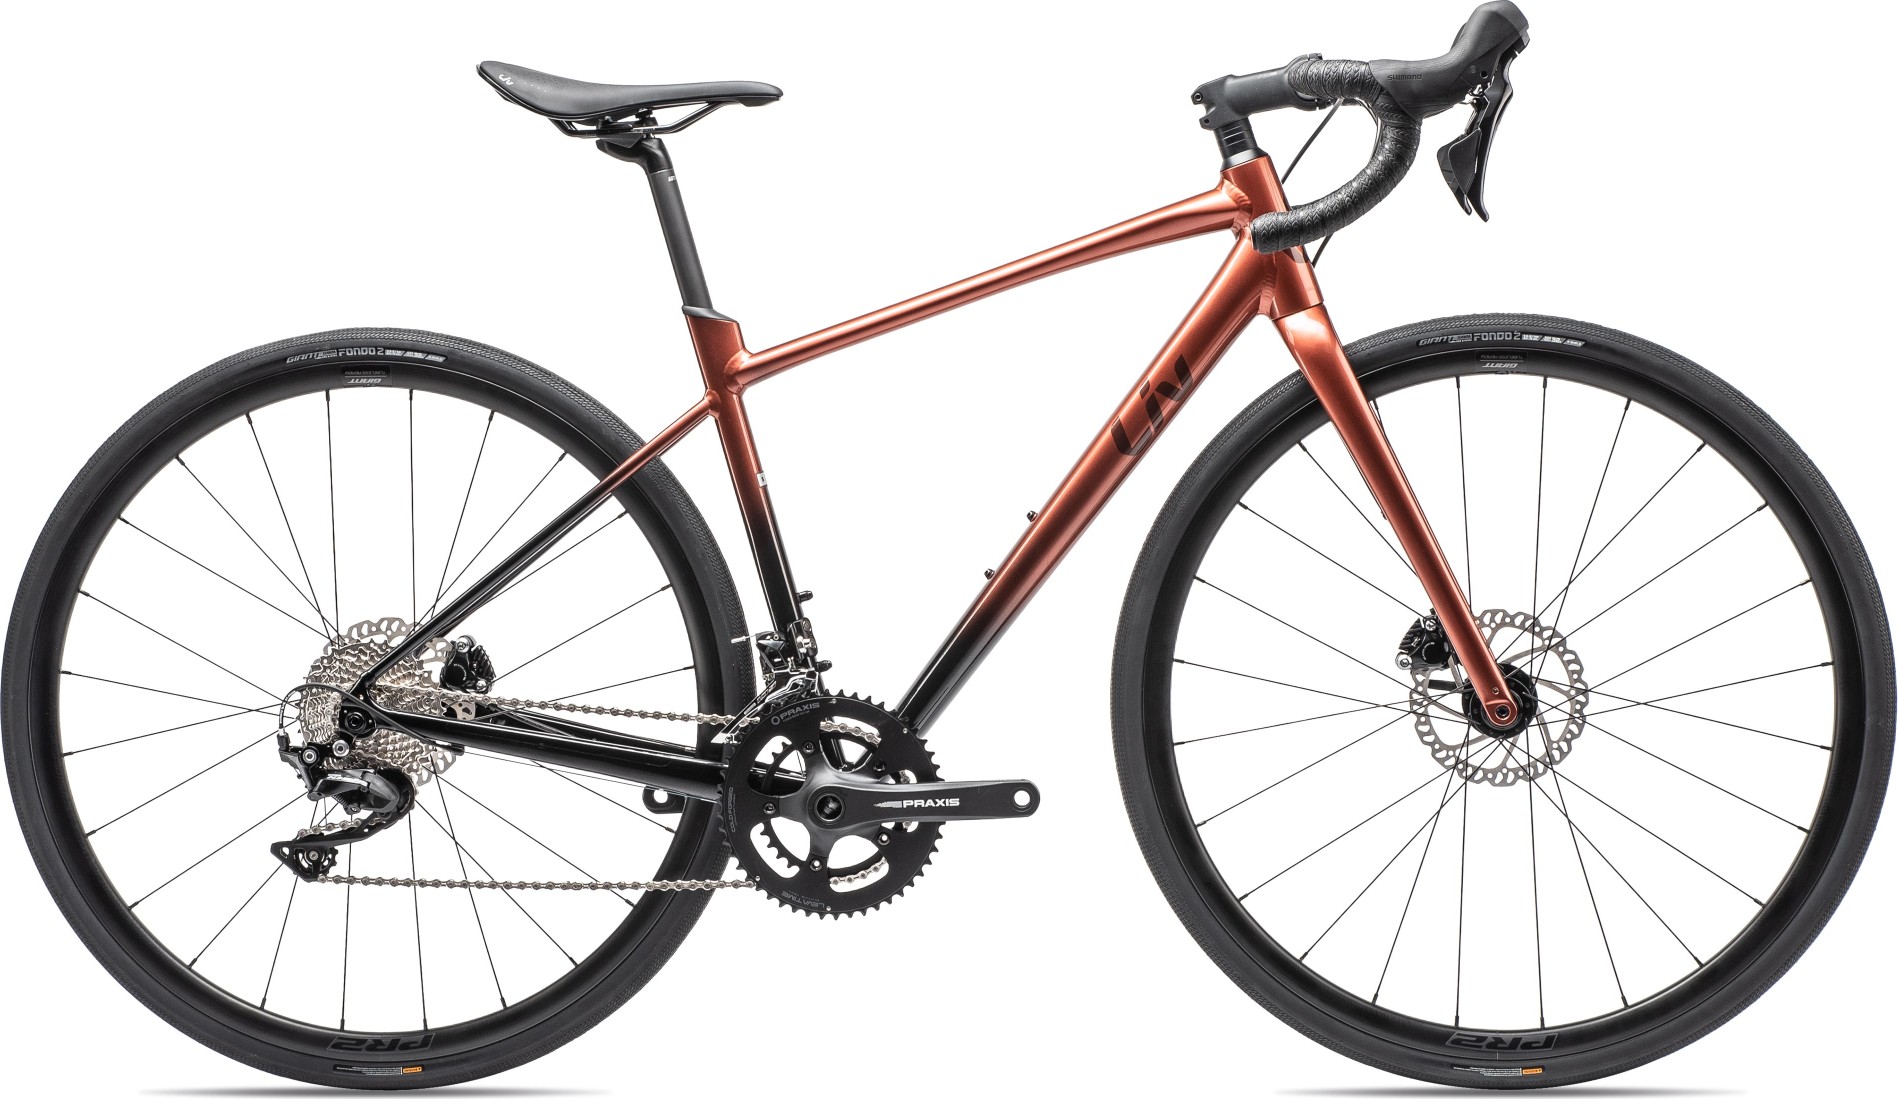 Copper Liv Avail AR 1 womens' road bike with Shimano 105 groupset and disc brakes